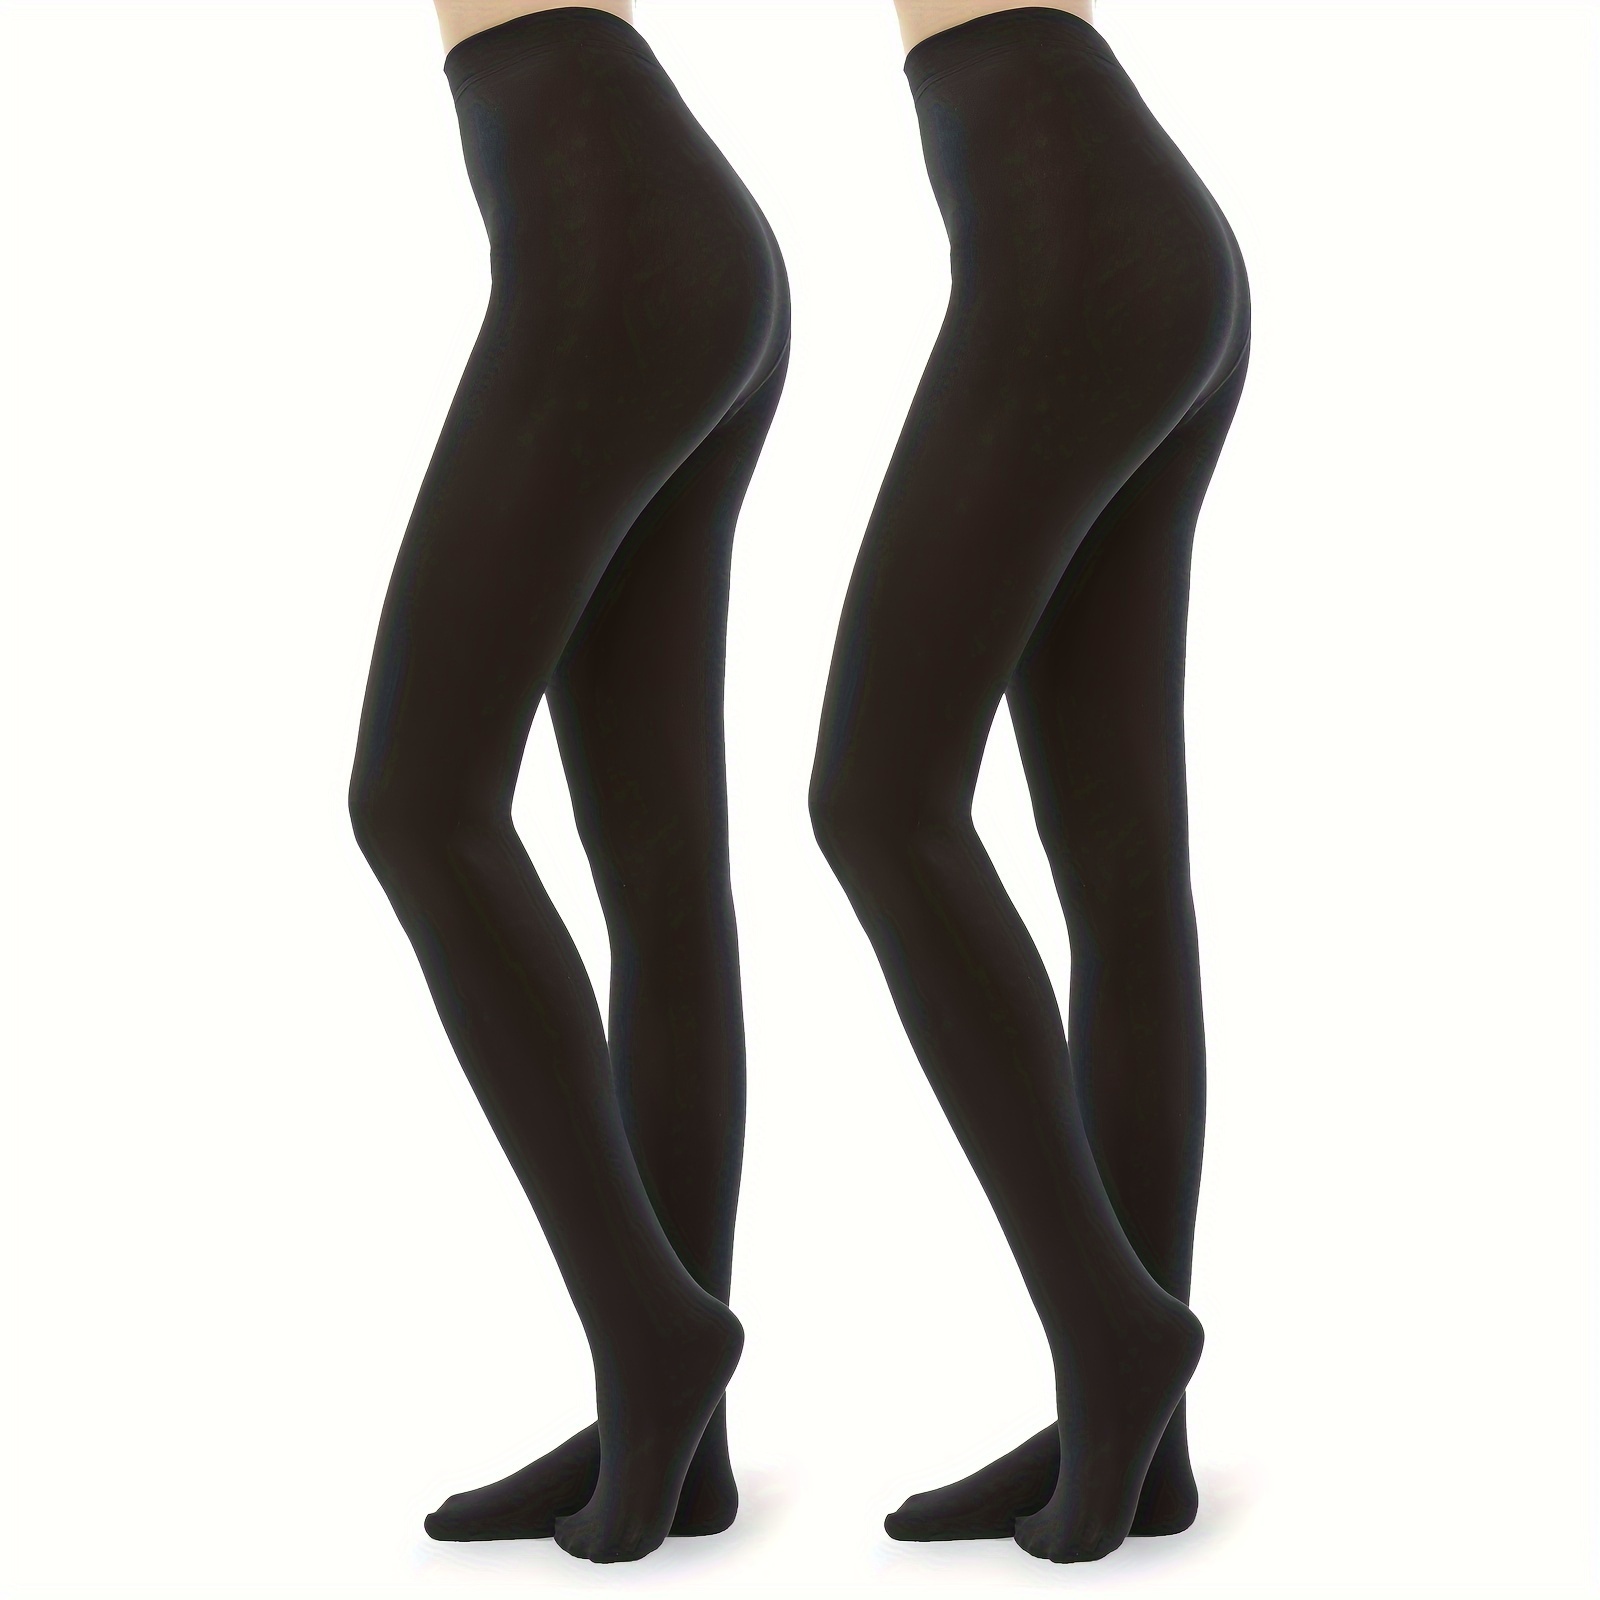 1/2/3 Pairs Plush Lined Tights, Opaque High Waist Thermal Elastic Leggings,  Women's Stockings & Hosiery